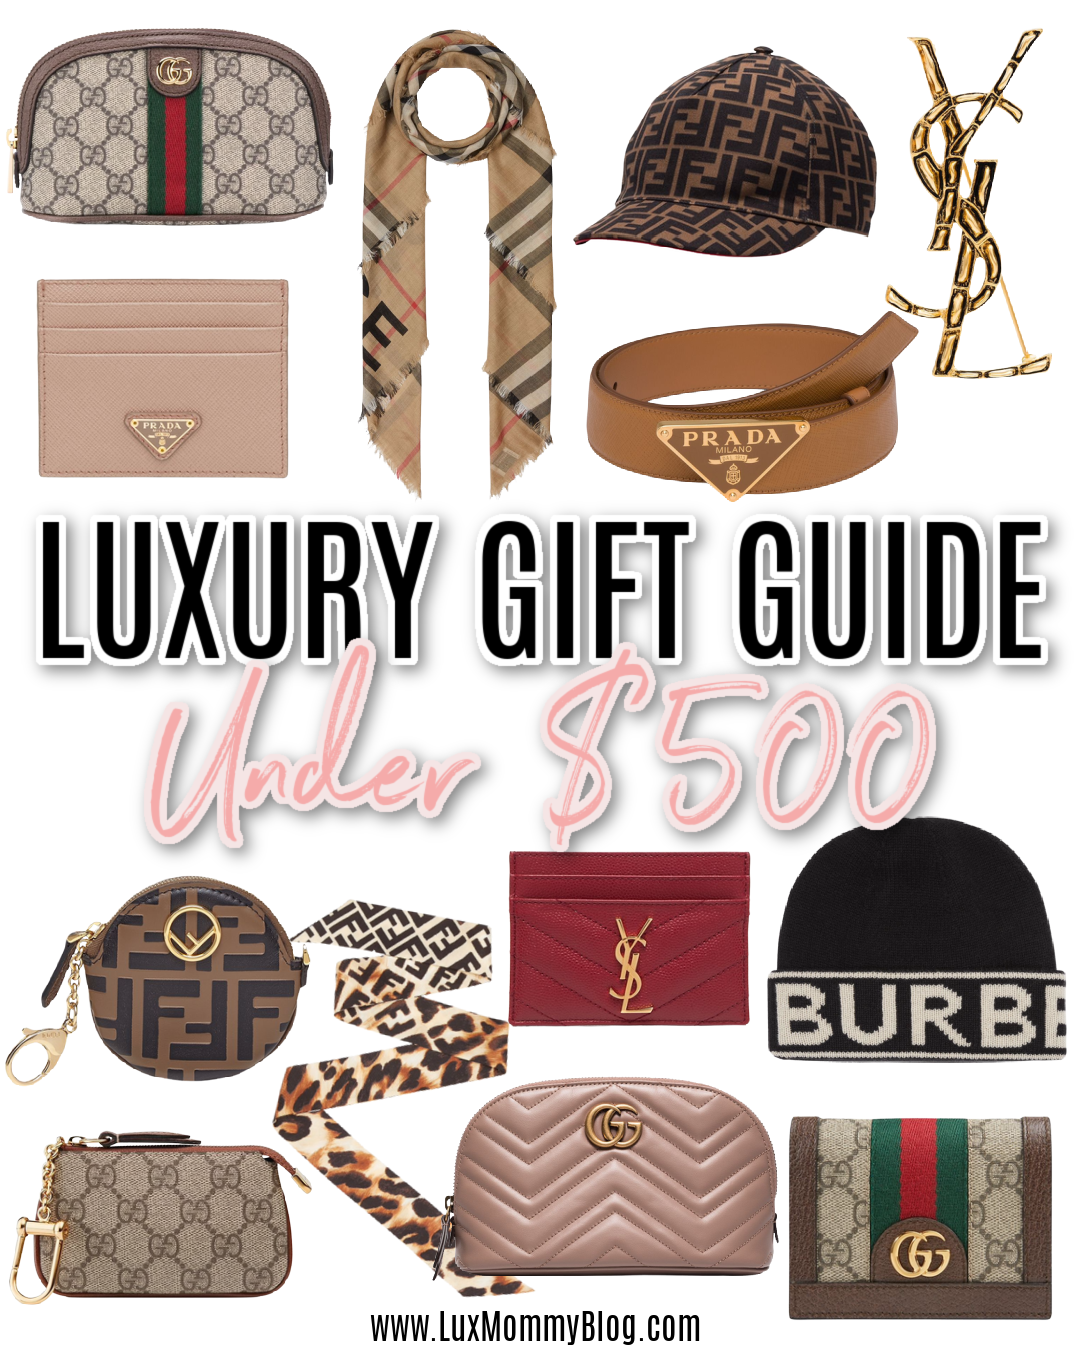 Little Luxury Gifts – Alicia Wood Lifestyle